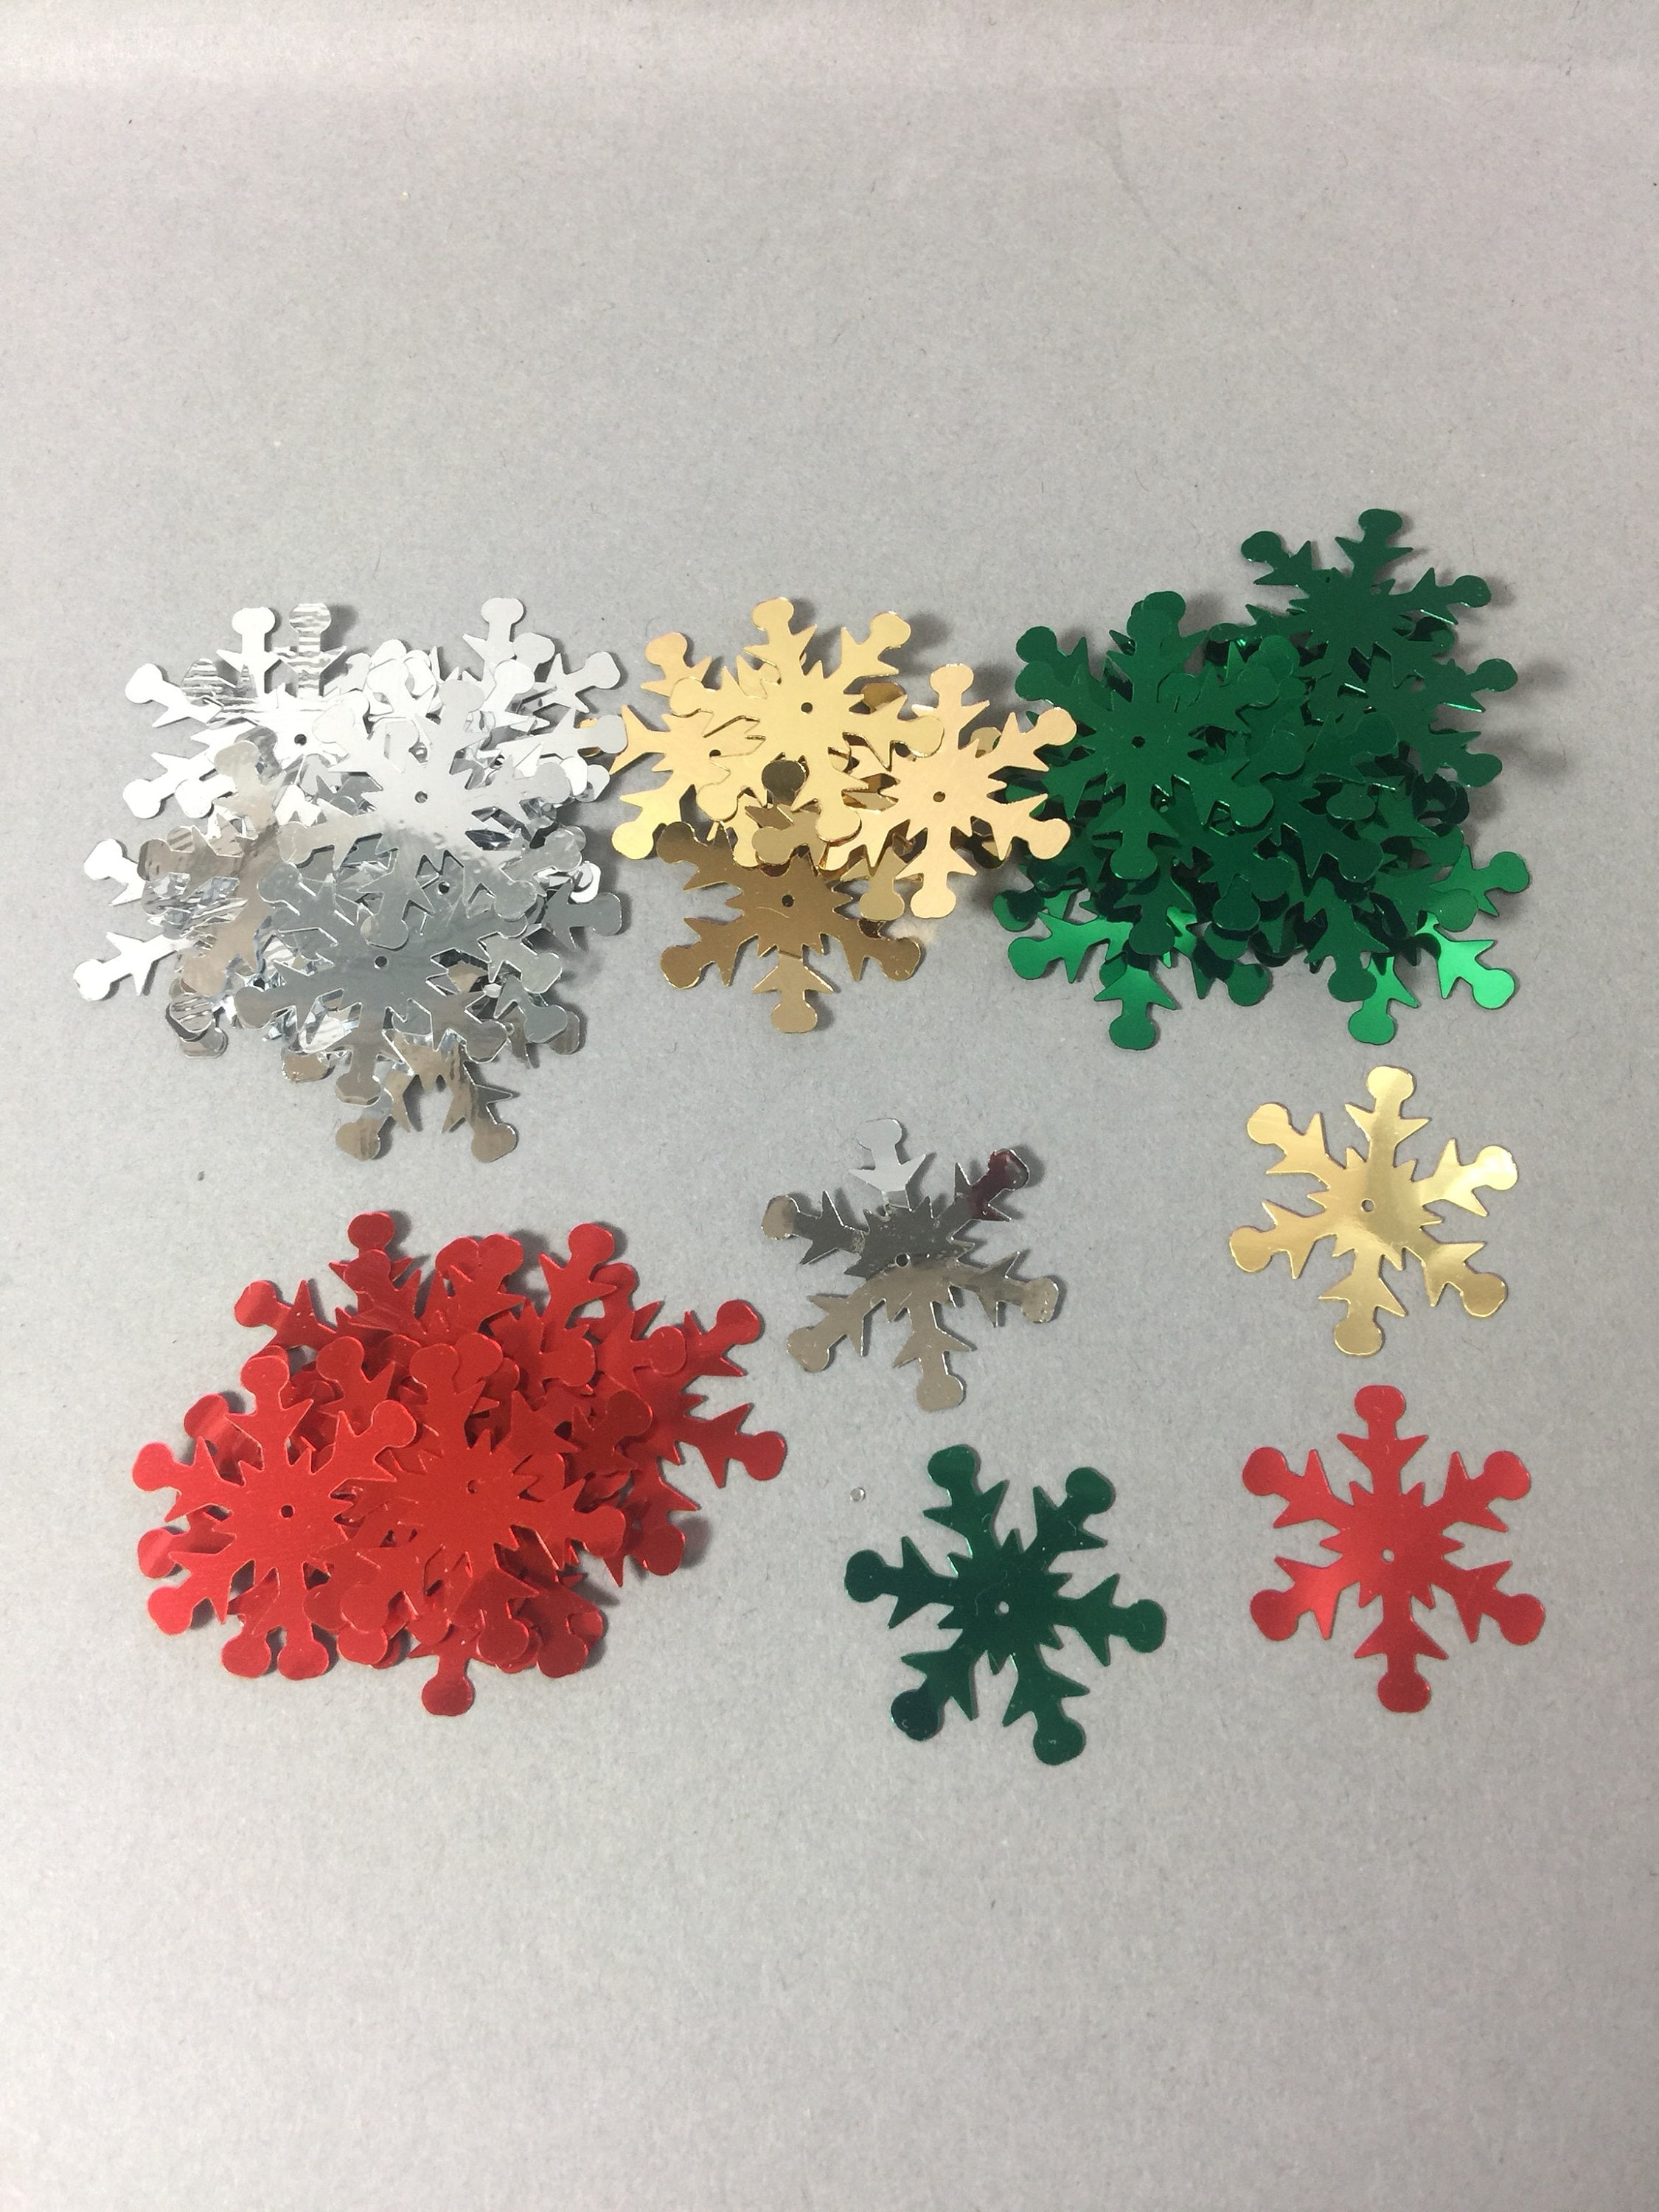 ORFOFE 10 Packs Hanging Snowflakes Sequins Christmas Glitter